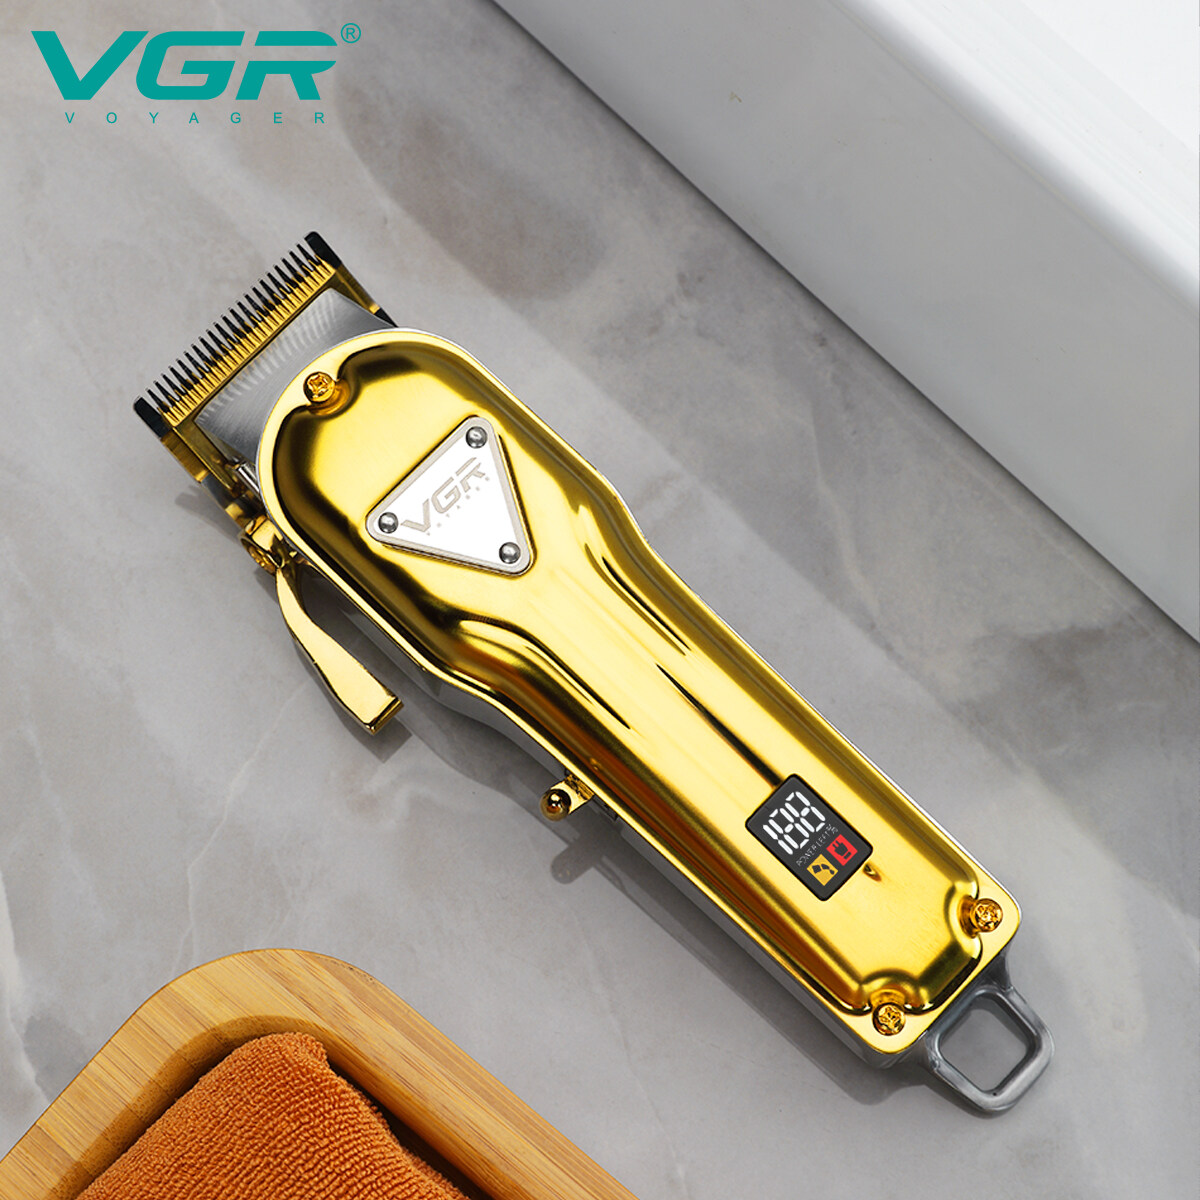 China Professional Rechargeable Hair Clipper Factory, Hair Clipper For Professional Barber, High End Hair Clippers, High Quality Clippers Barber, Wholesale Professional Adjustable Hair Clippers, Wholesale Professional Rechargeable Professional Hair Clipper